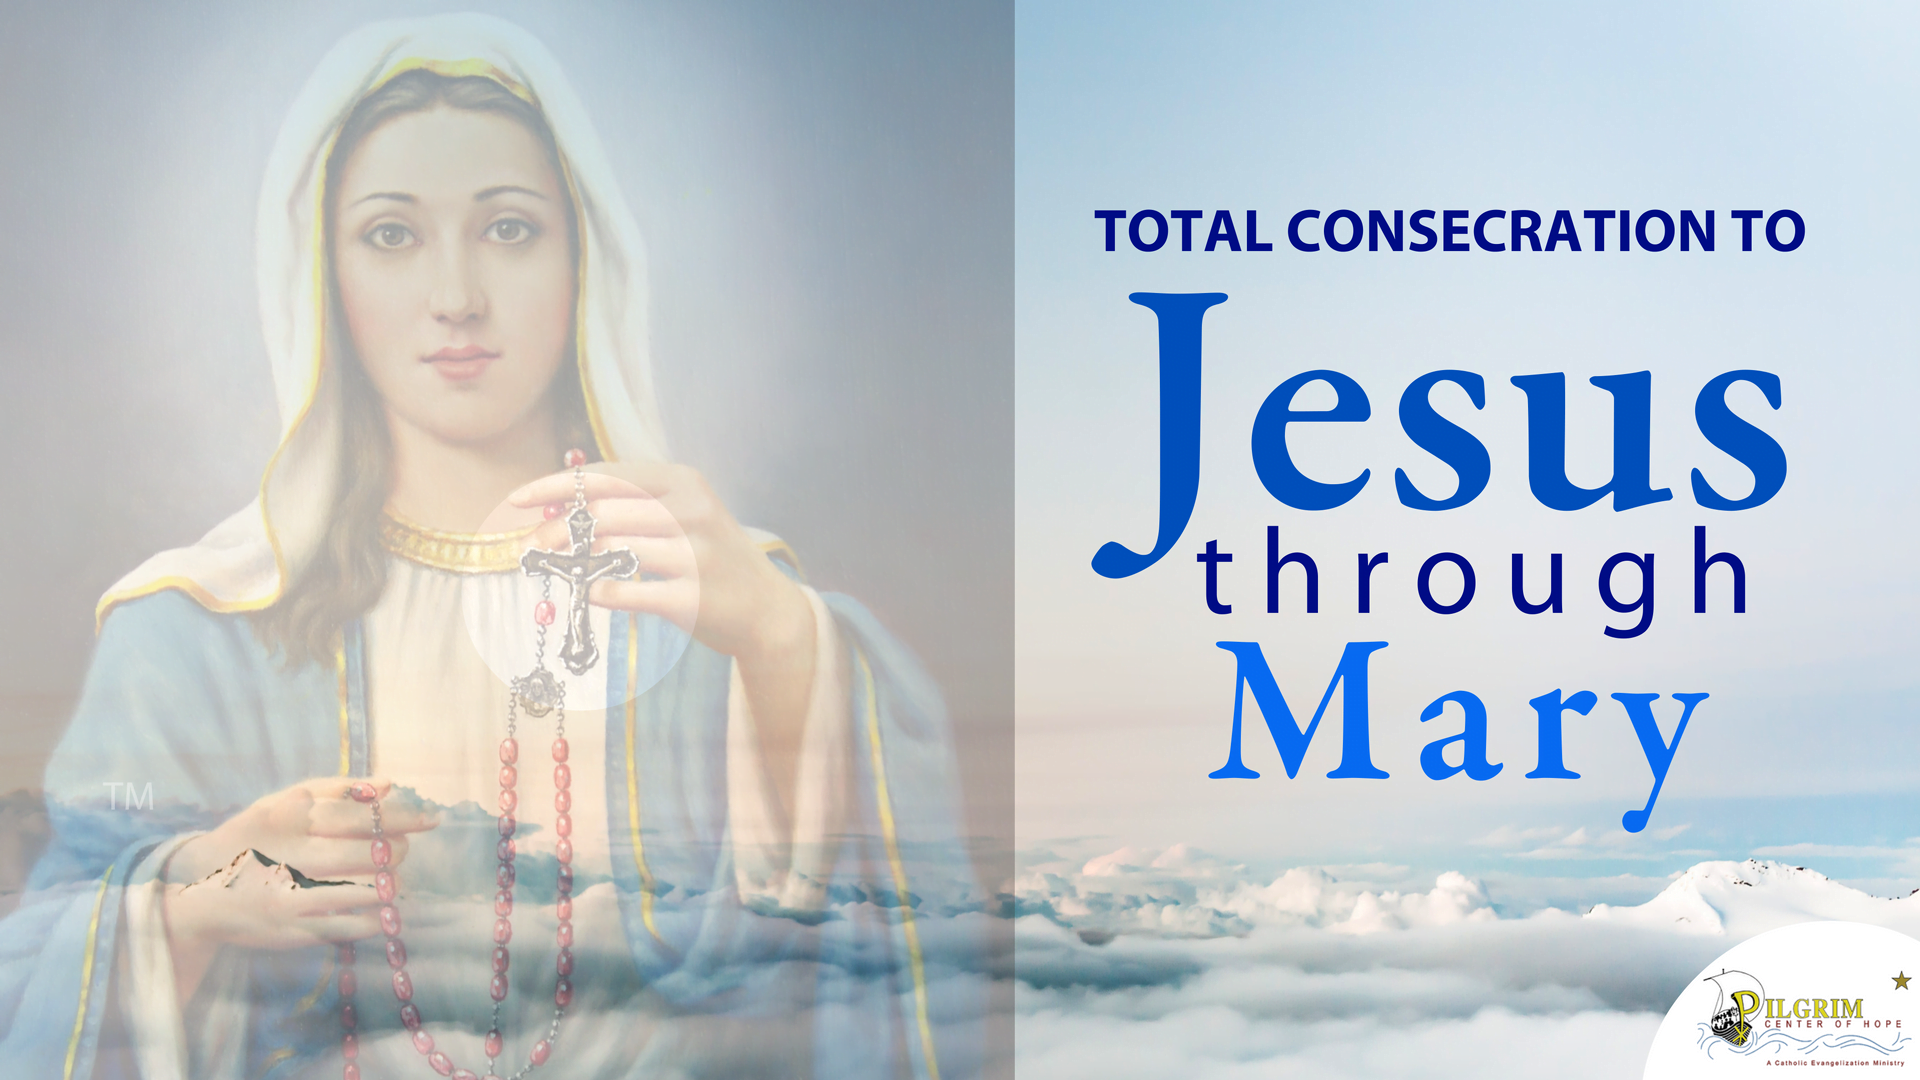 Preparation for the Total Consecration to Jesus through Mary Begins